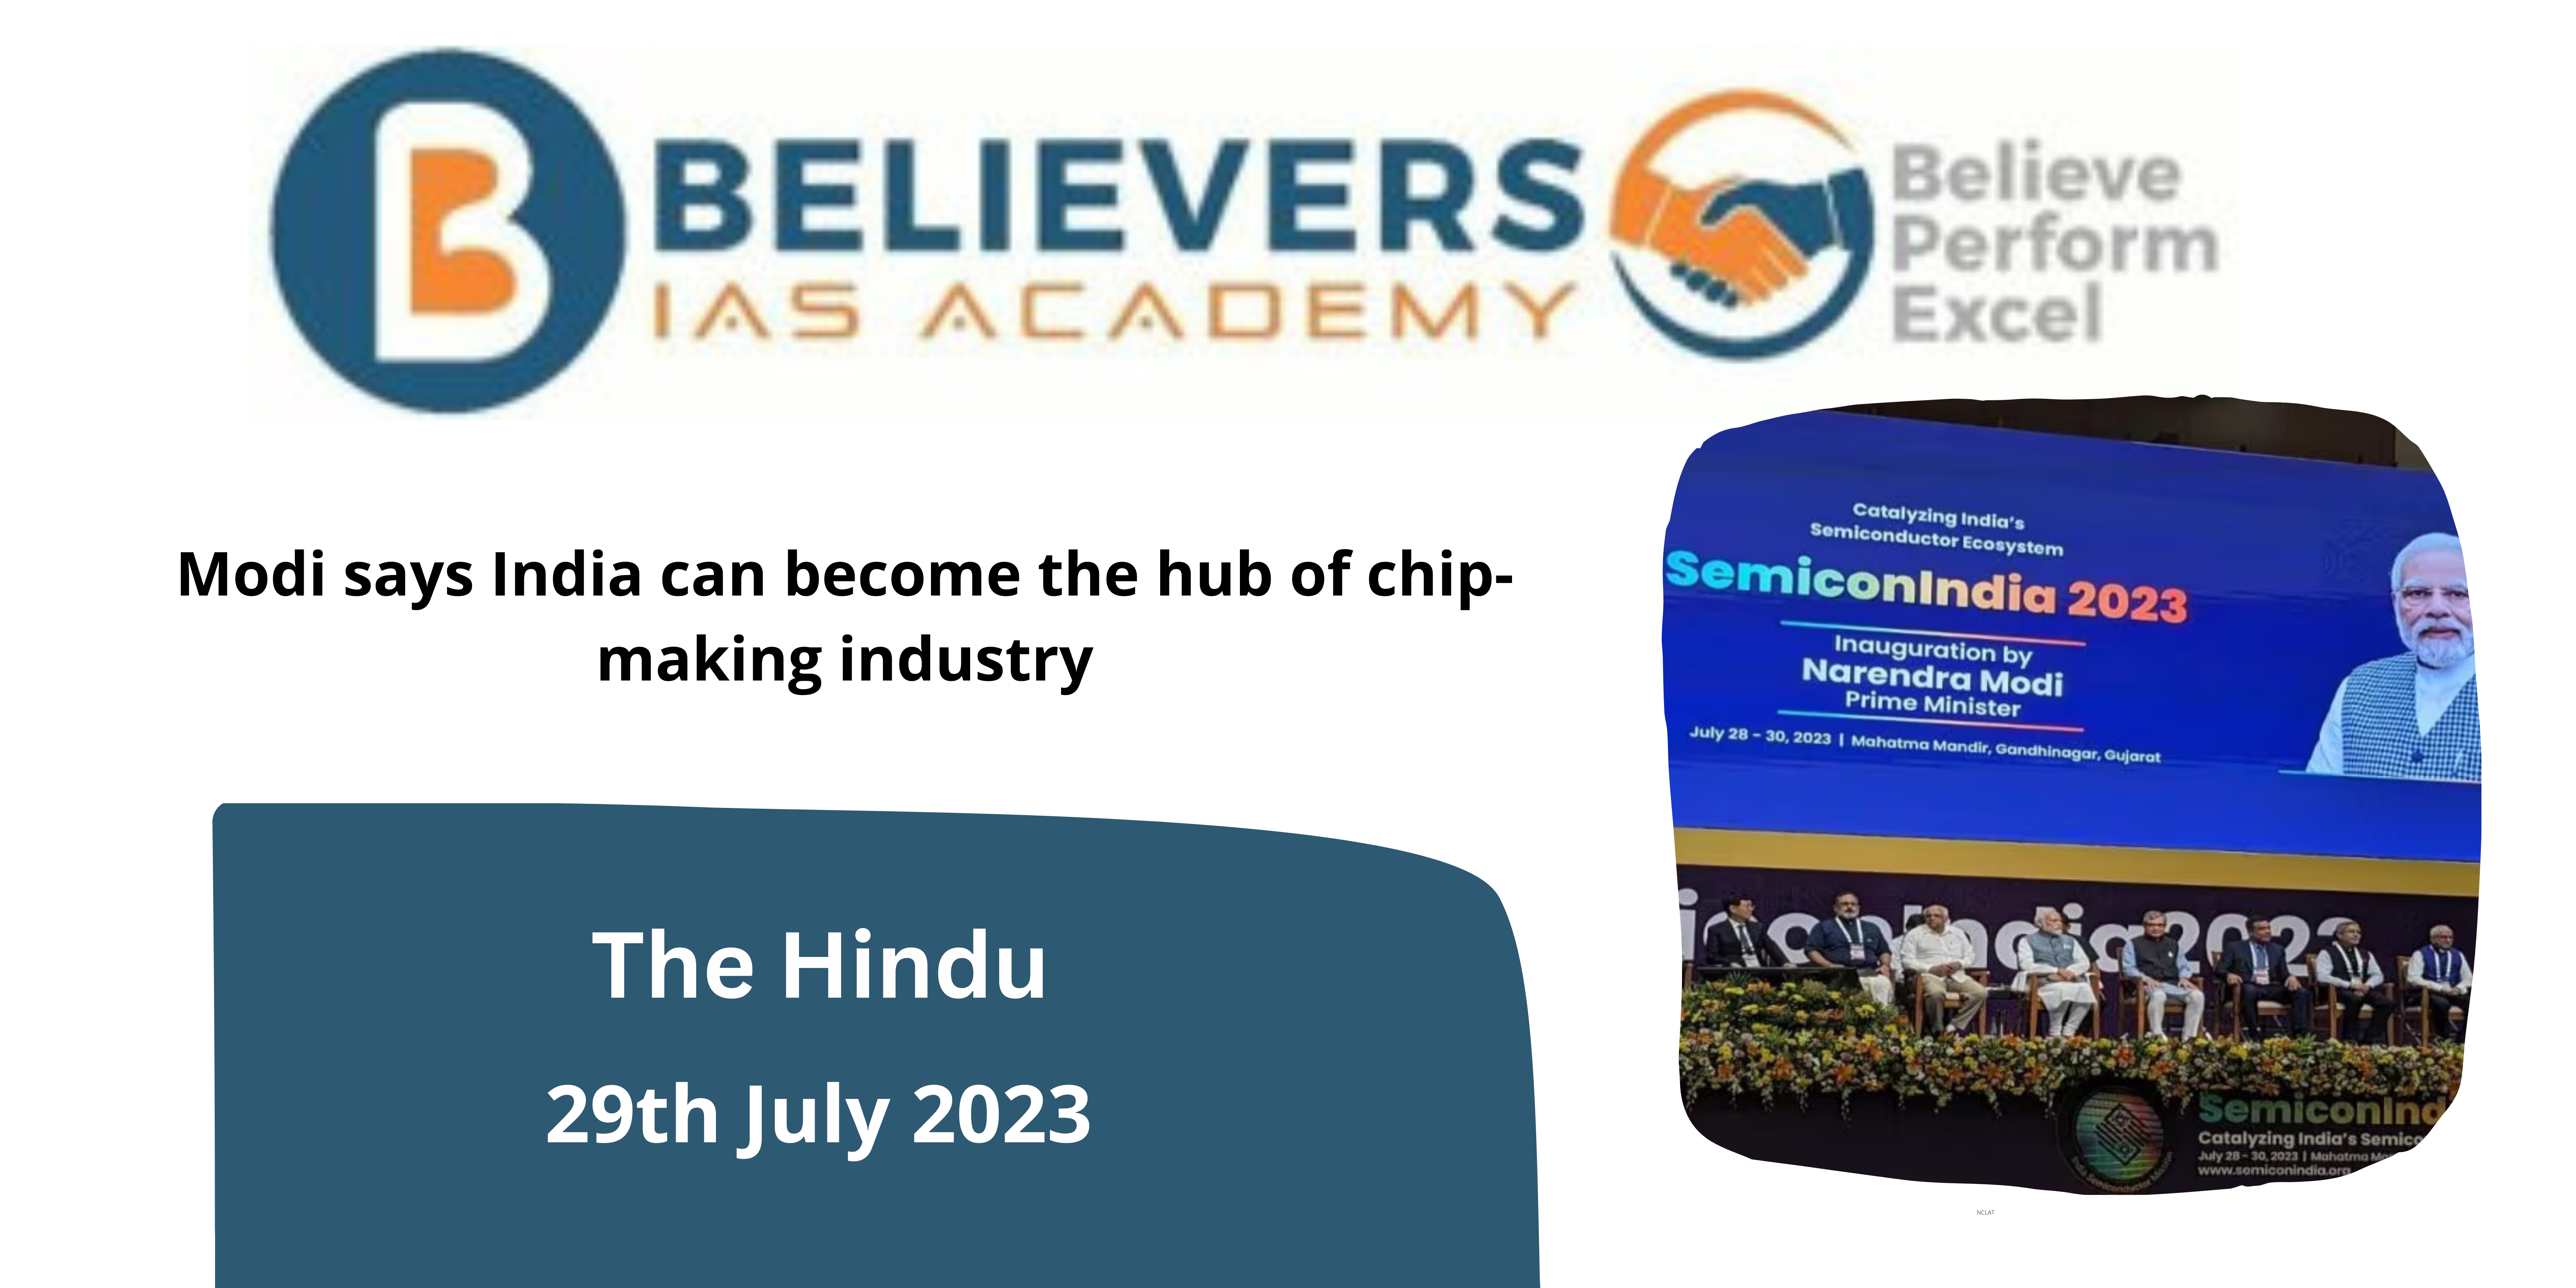 Modi says India can become the hub of chip-making industry